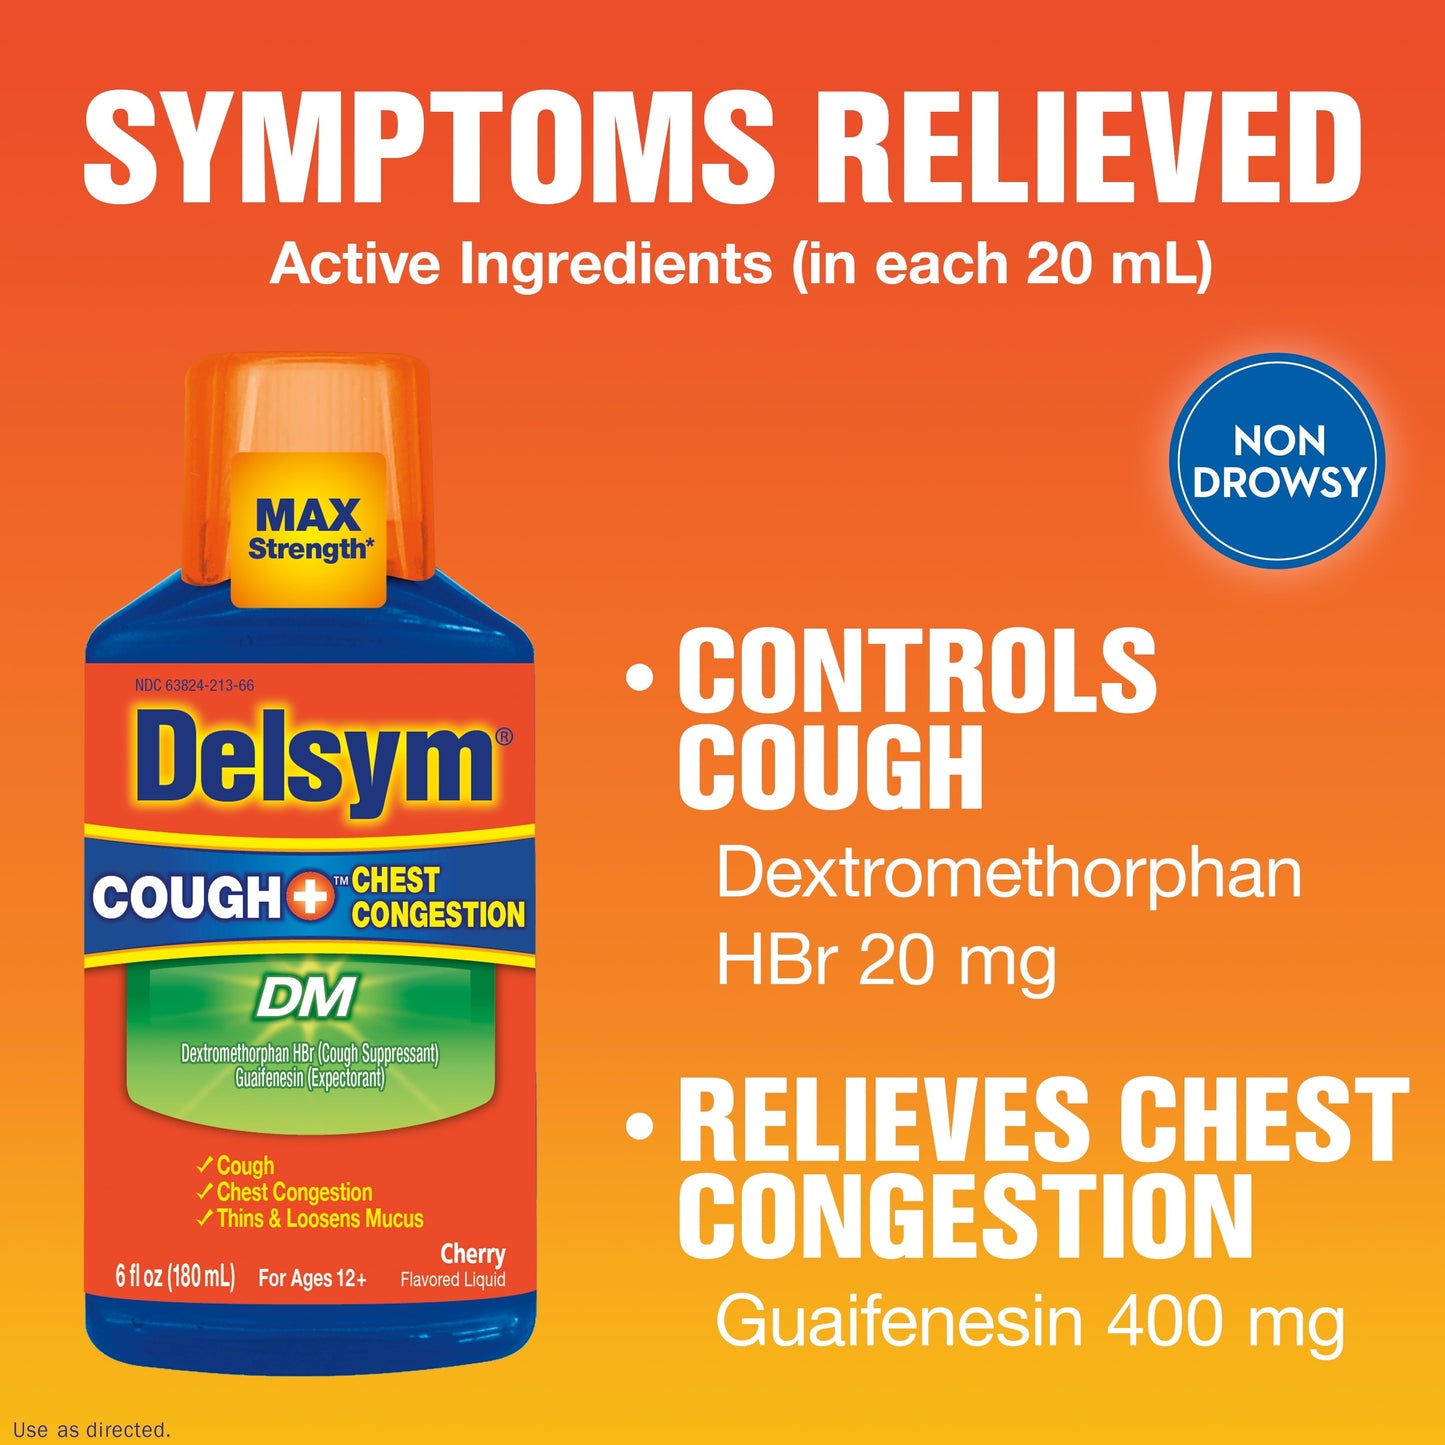 Delsym Max Strength DM Cough + Chest Congestion Medicine, Powerful Multi-Symptom Relief, #1 Pharmacist Recommended, Cherry Flavor, 6 Fl Oz